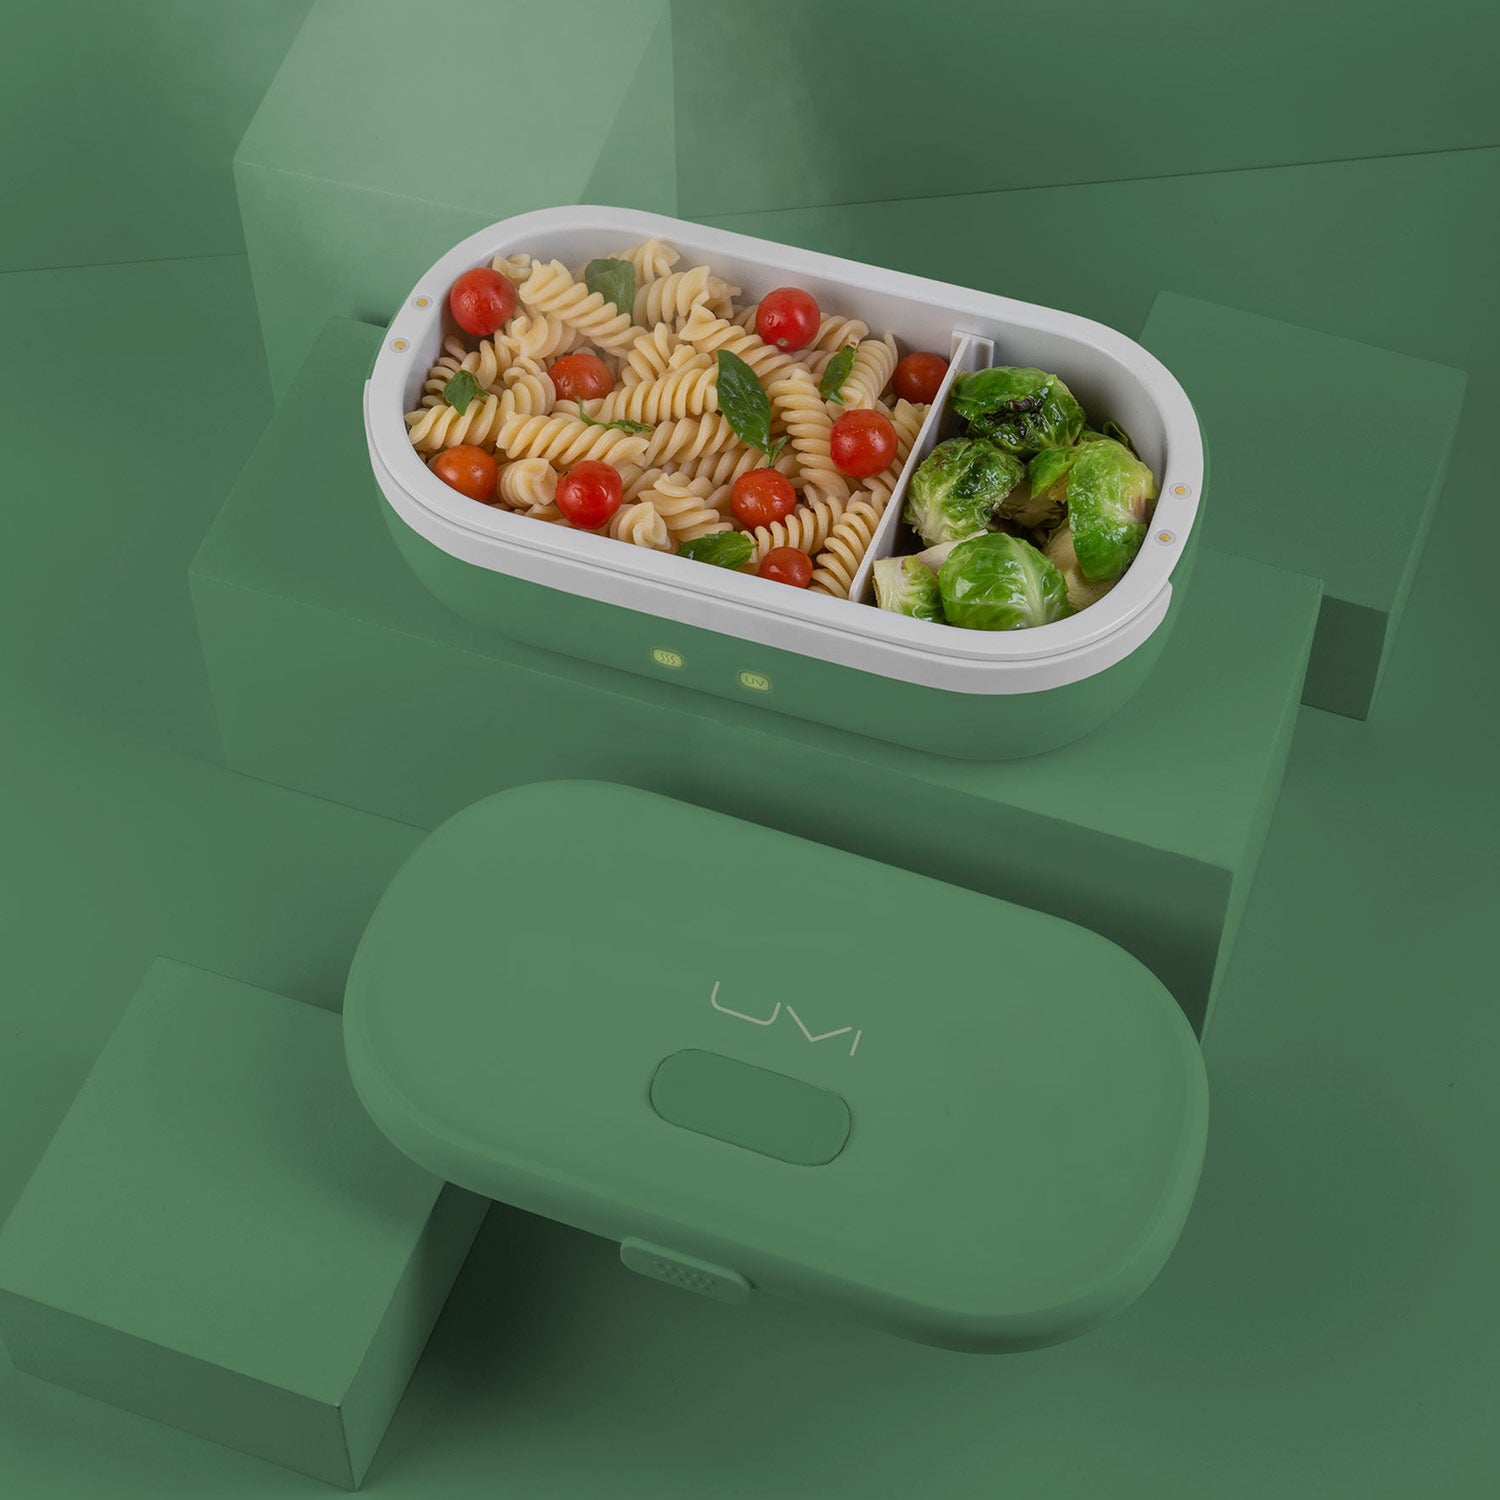 Green Pea UVI Self Heating & Cleaning Lunch Box » UVI